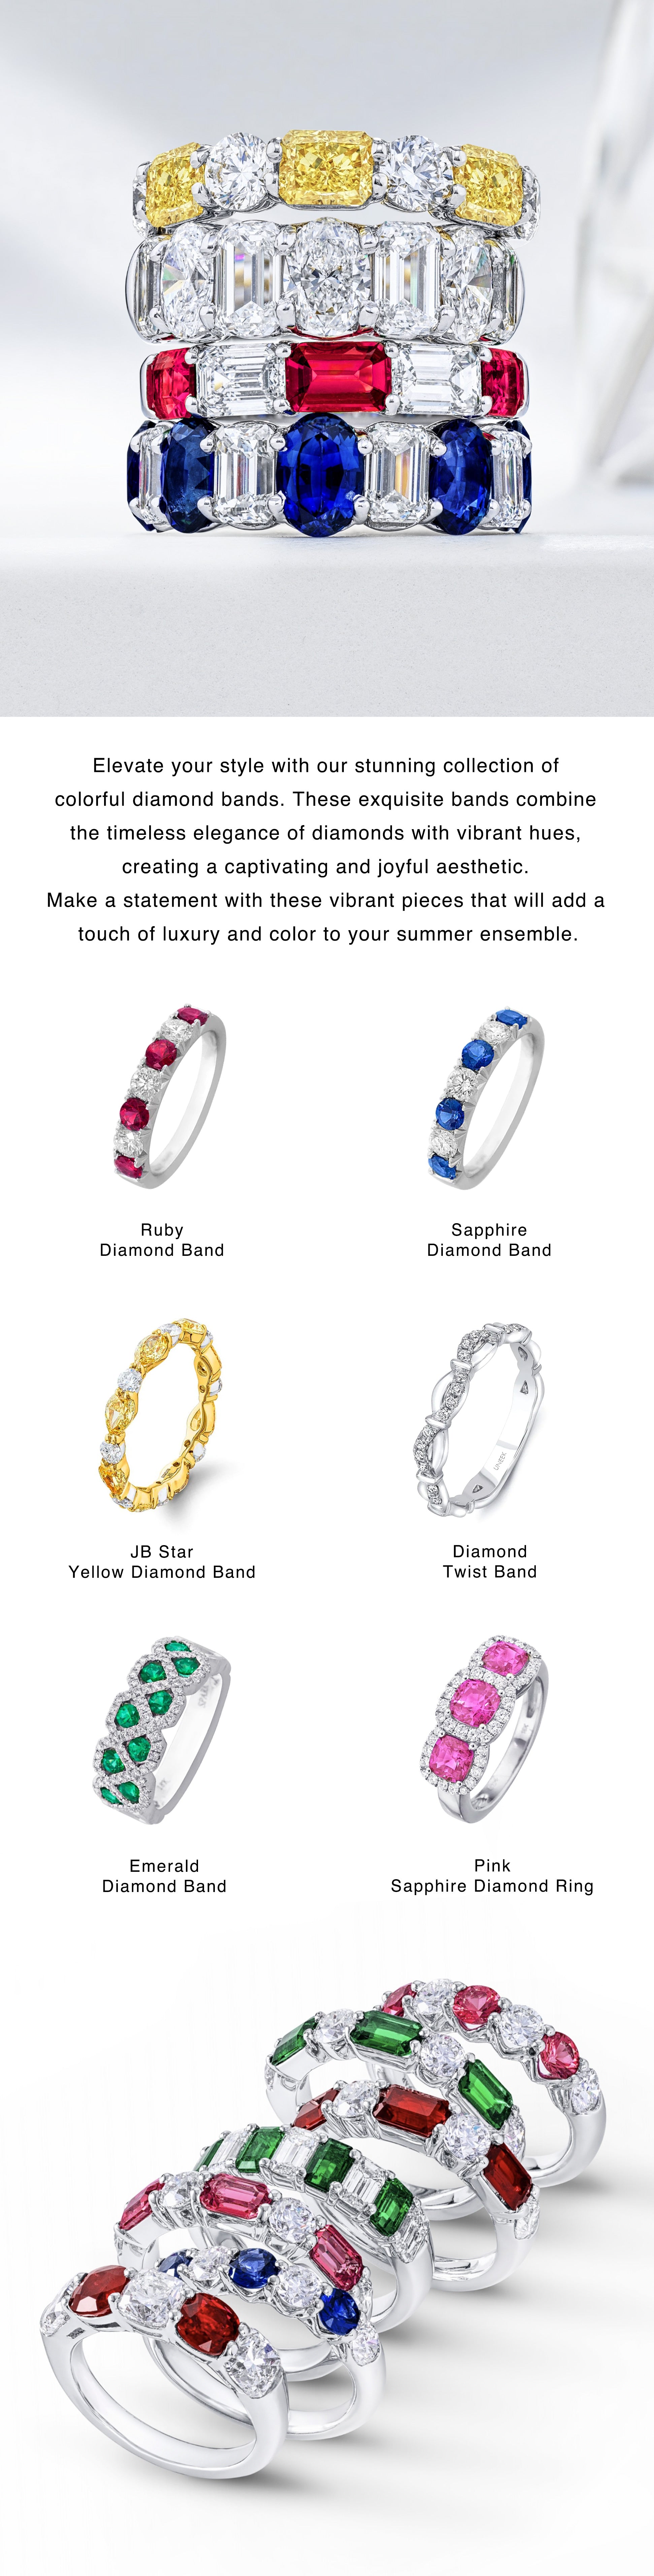 CH Collection - Colorful Diamond Bands - ring - band - colored stones - fashion deamond - ruby - sapphire - emerald - diamonds 